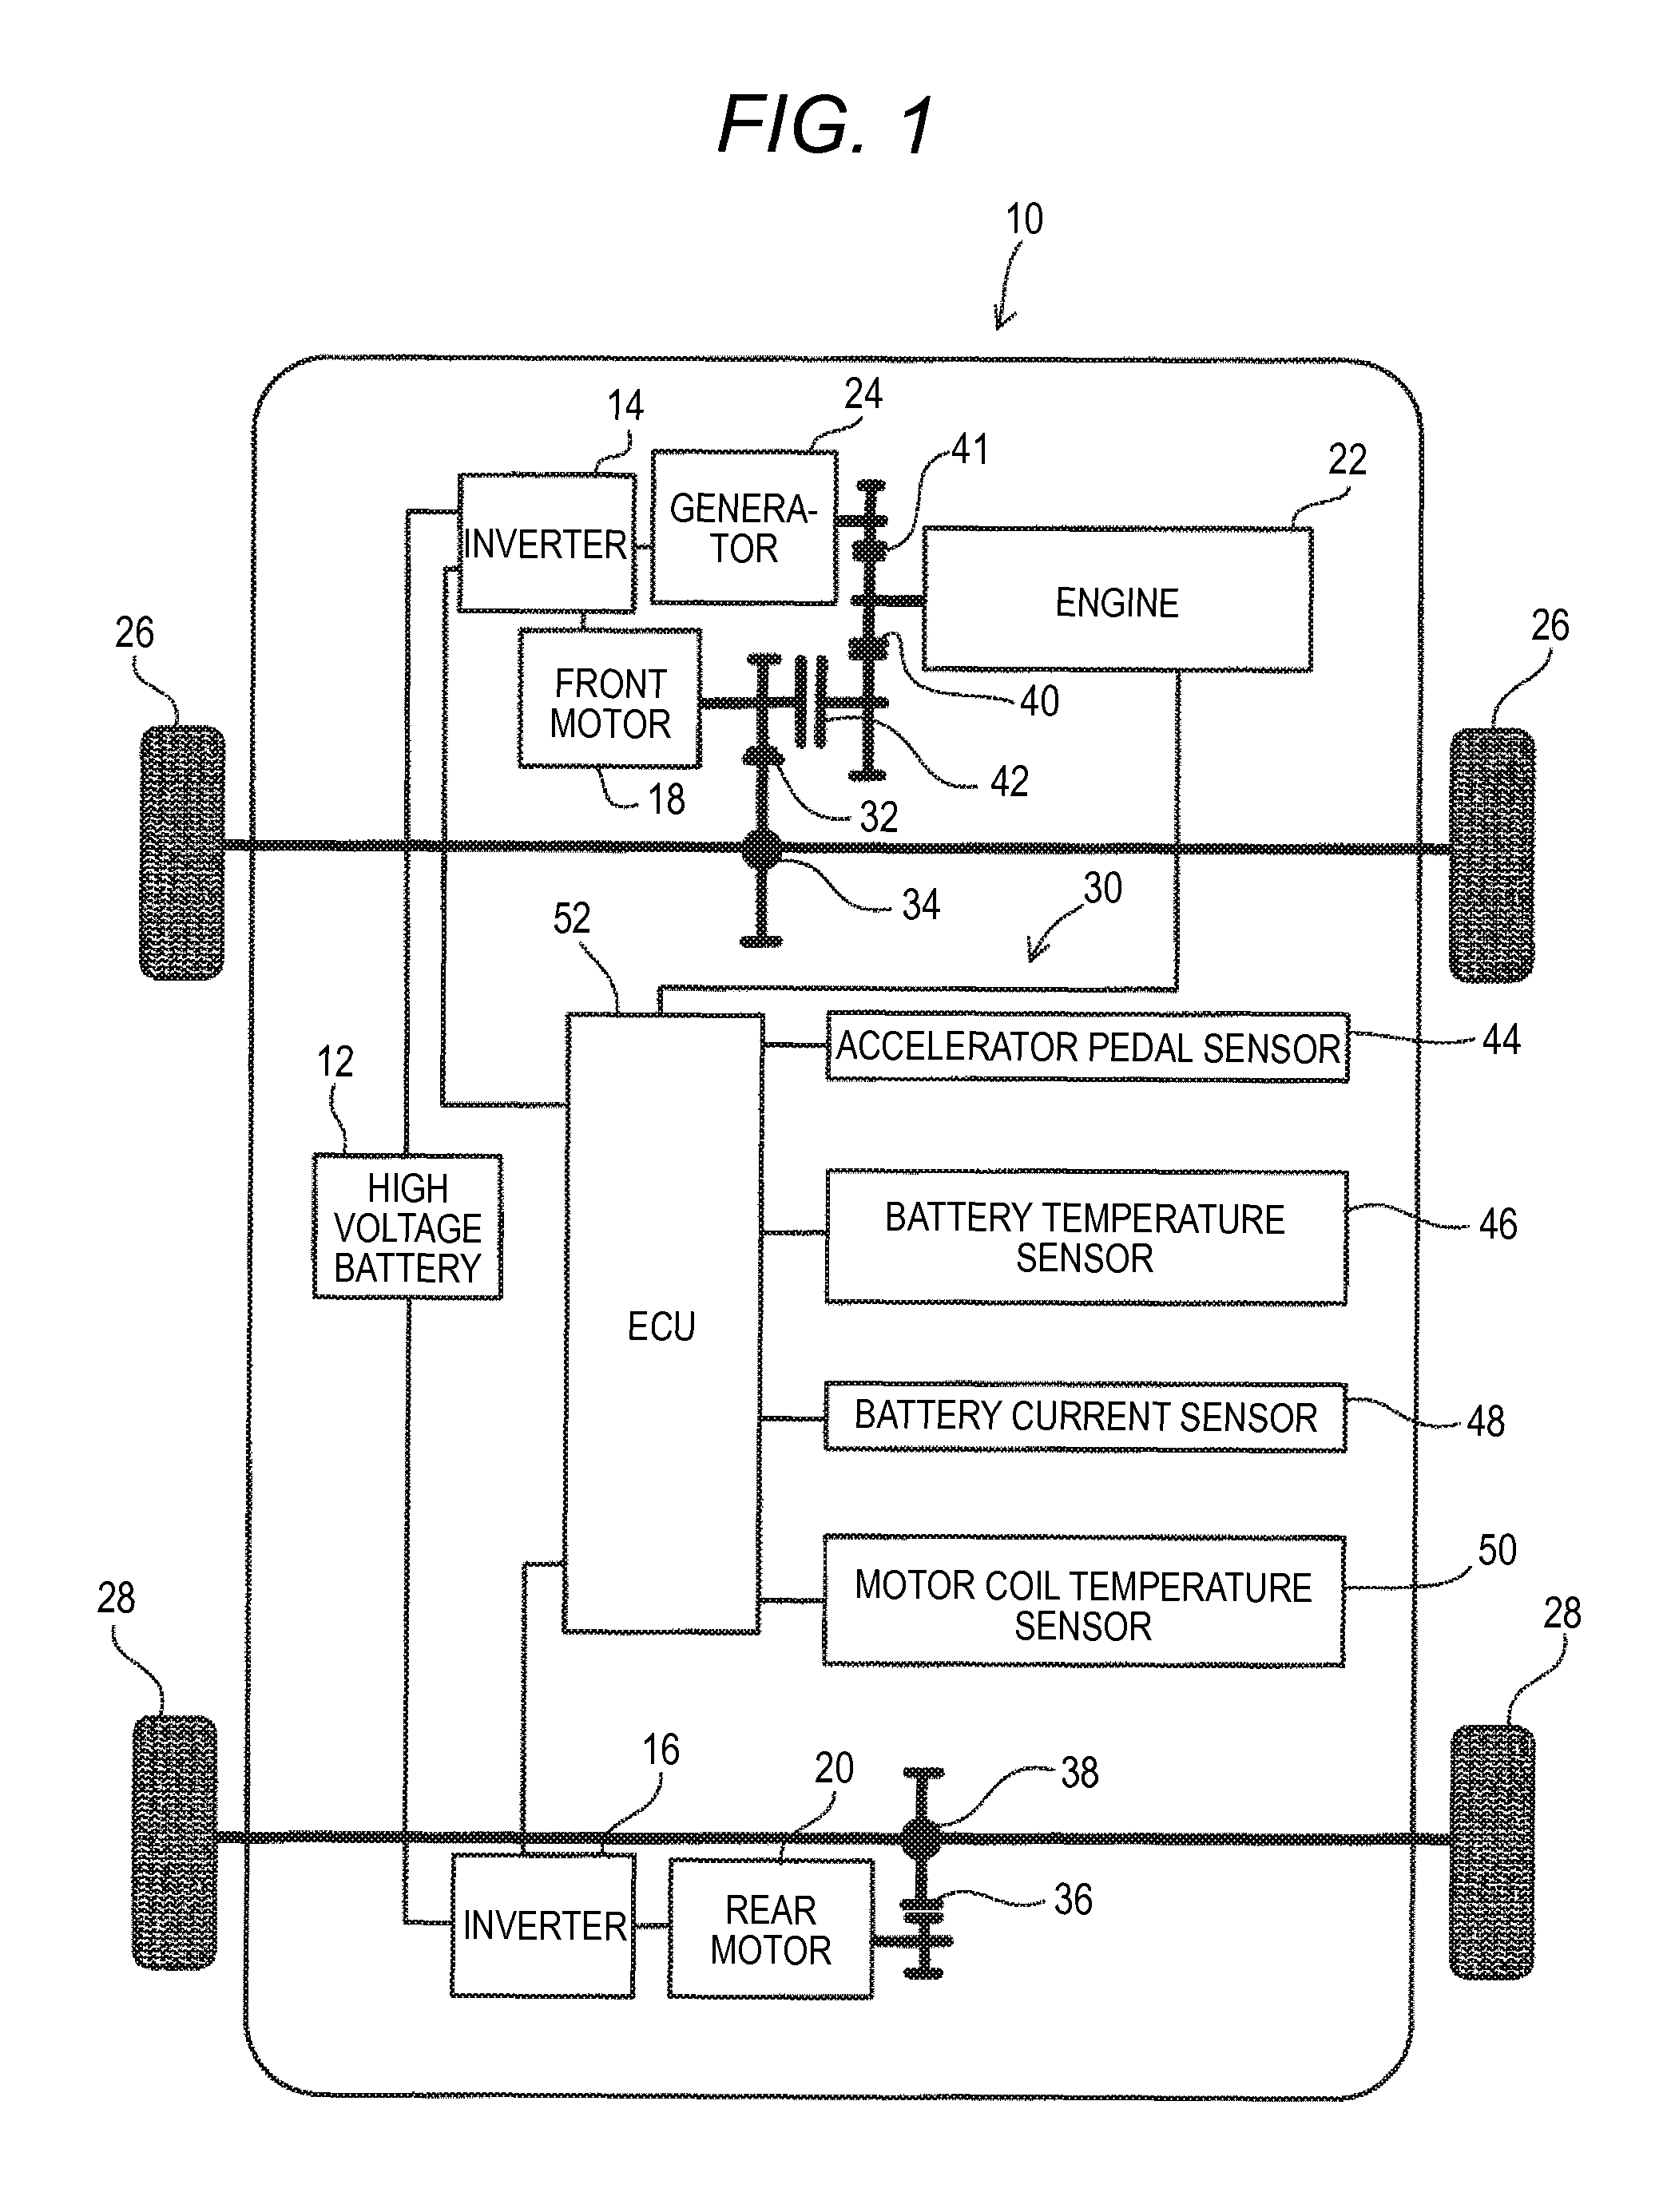 Control apparatus for hybrid electric vehicle